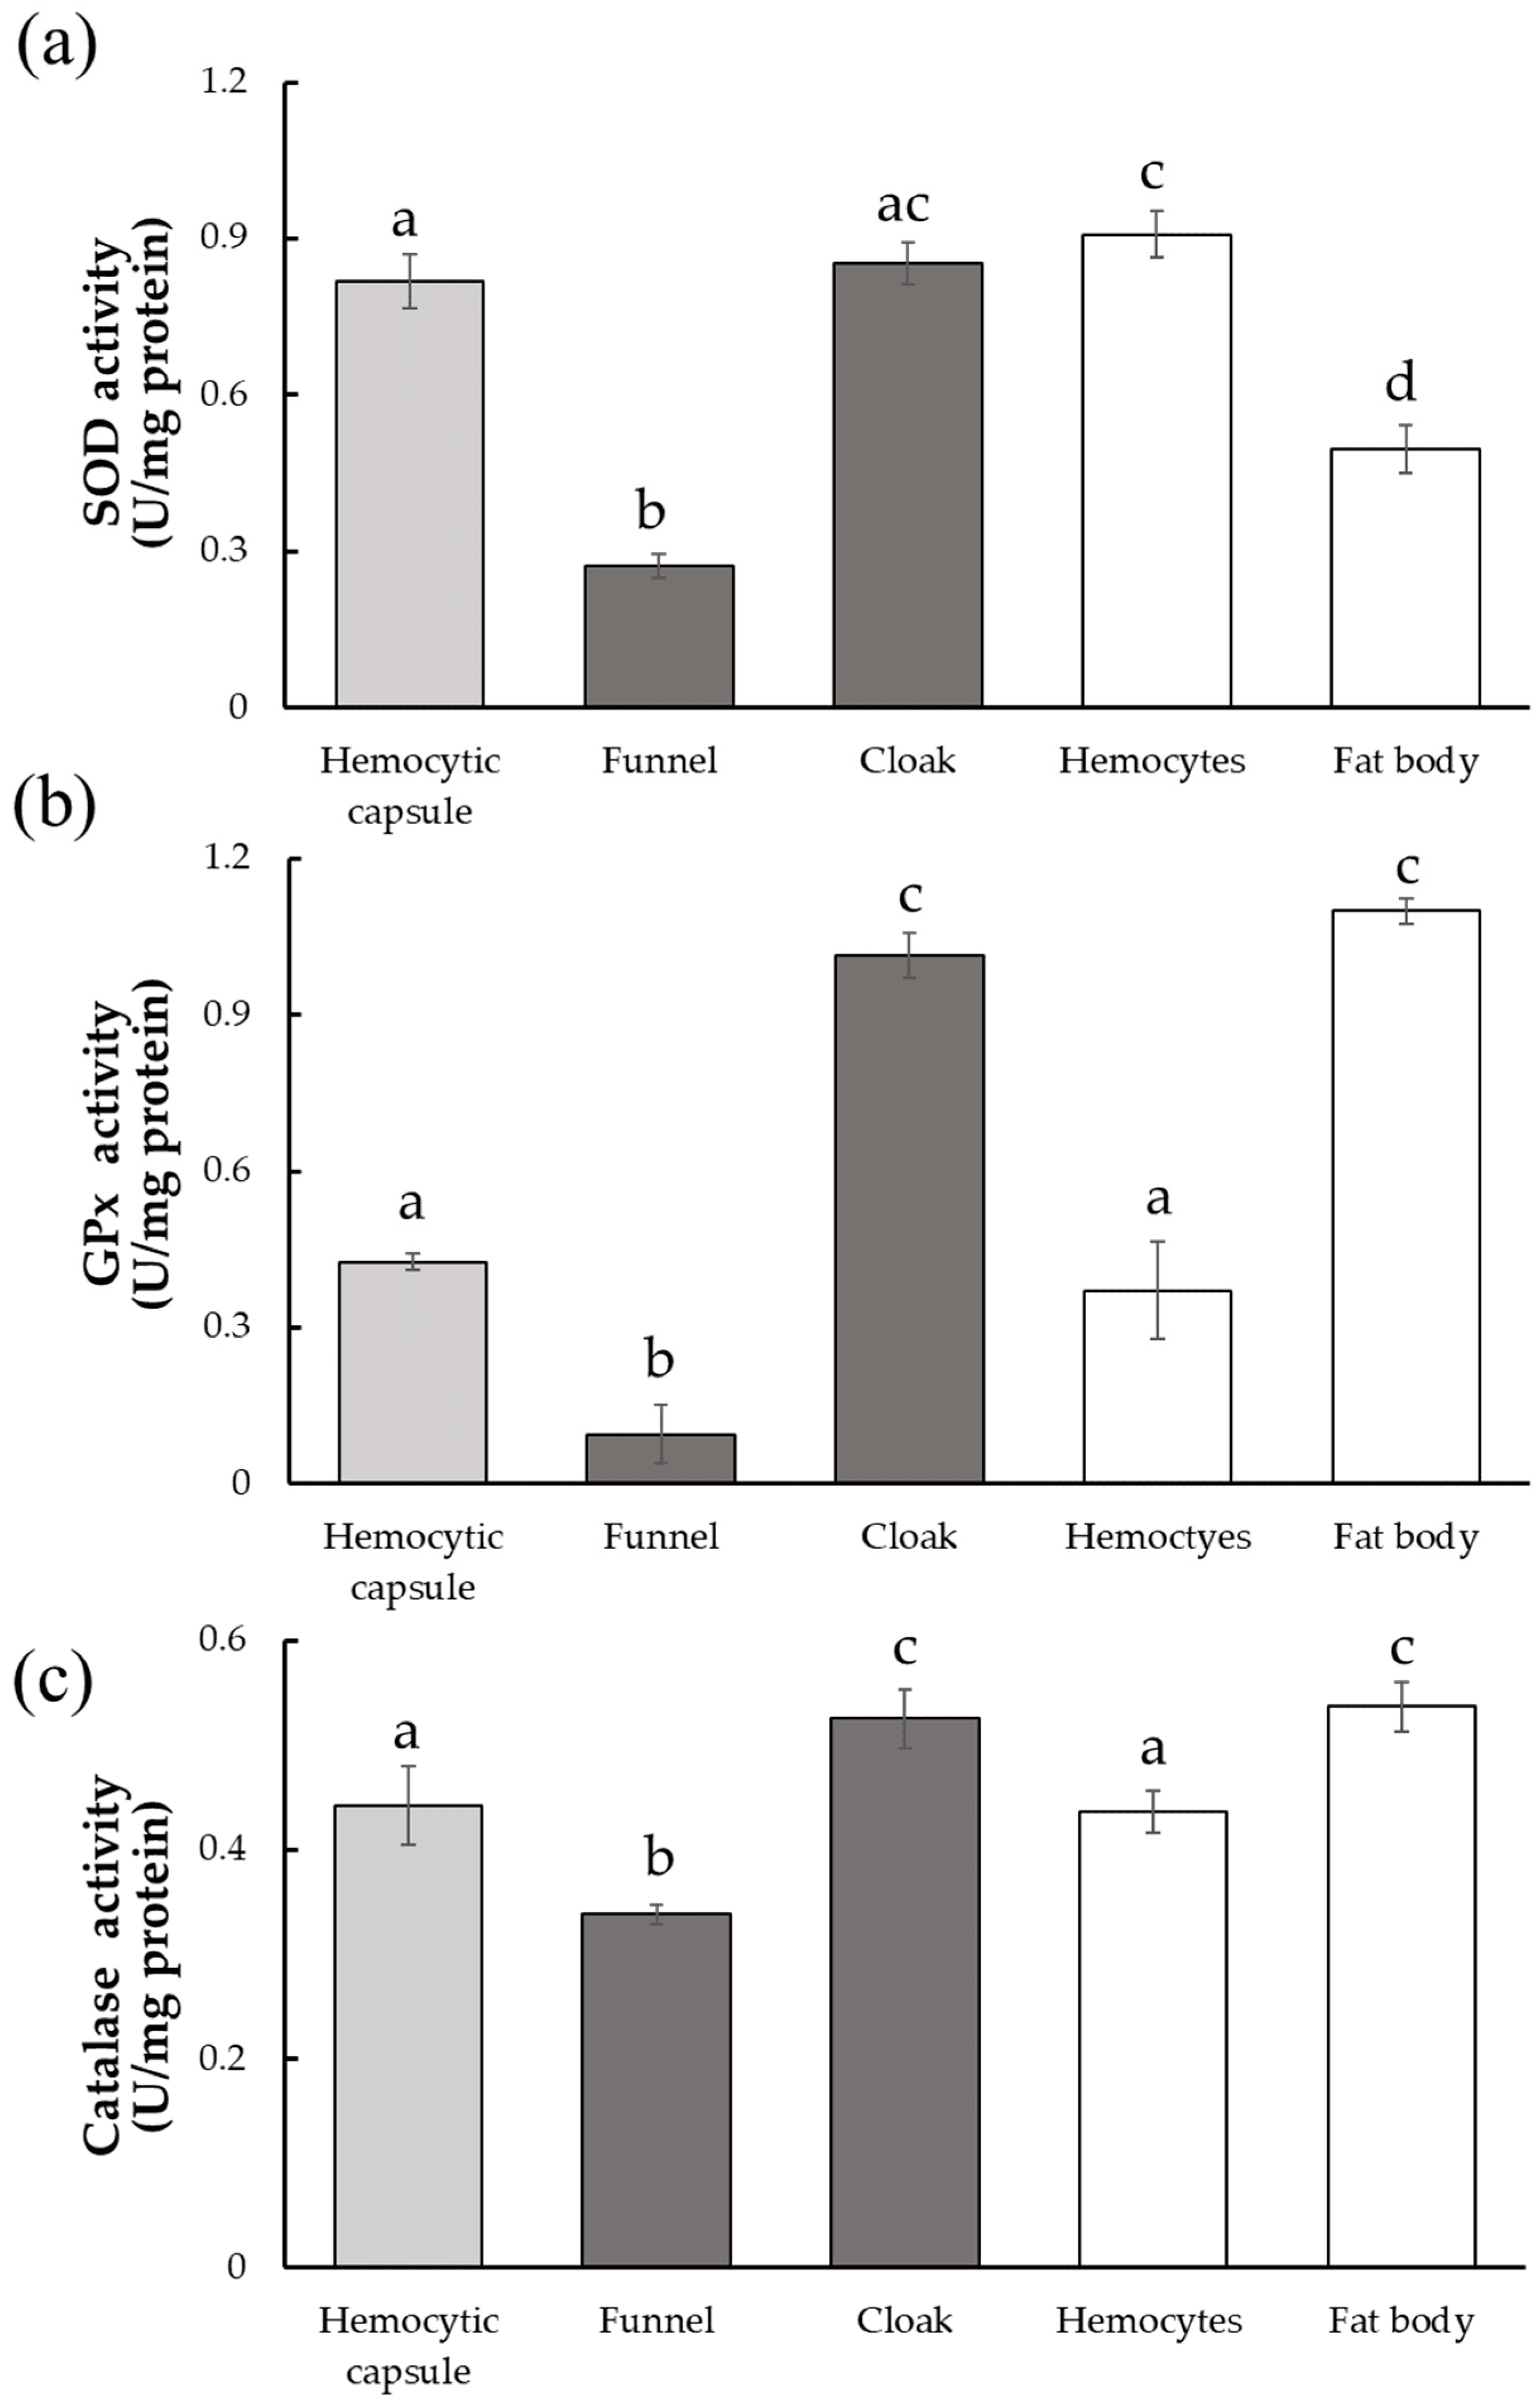 Activities of three antioxidant enzymes in host-derived structures surrounding developing Drino inconspicuoides larva. (a) Superoxidase dismutase (SOD) activity; (b) Glutathione peroxidase (GPx) activity; (c) Catalase activity. Each value is expressed as the mean ± standard deviation of samples (n = 5). Different letters above each bar denote significant differences (p < 0.01). GPx activity was detected using the Amplite Fluorimetric Glutathione Peroxidase Assay Kit (AAT Bioquest, CA, USA). Source: <b>Cloak Scavenges the Reactive Oxygen Species around the Larvae of Drino inconspicuoides (Diptera: Tachinidae)</b> by Zhang K, Nakamura S, Furukawa S. <em>Insects</em>. July 2023.